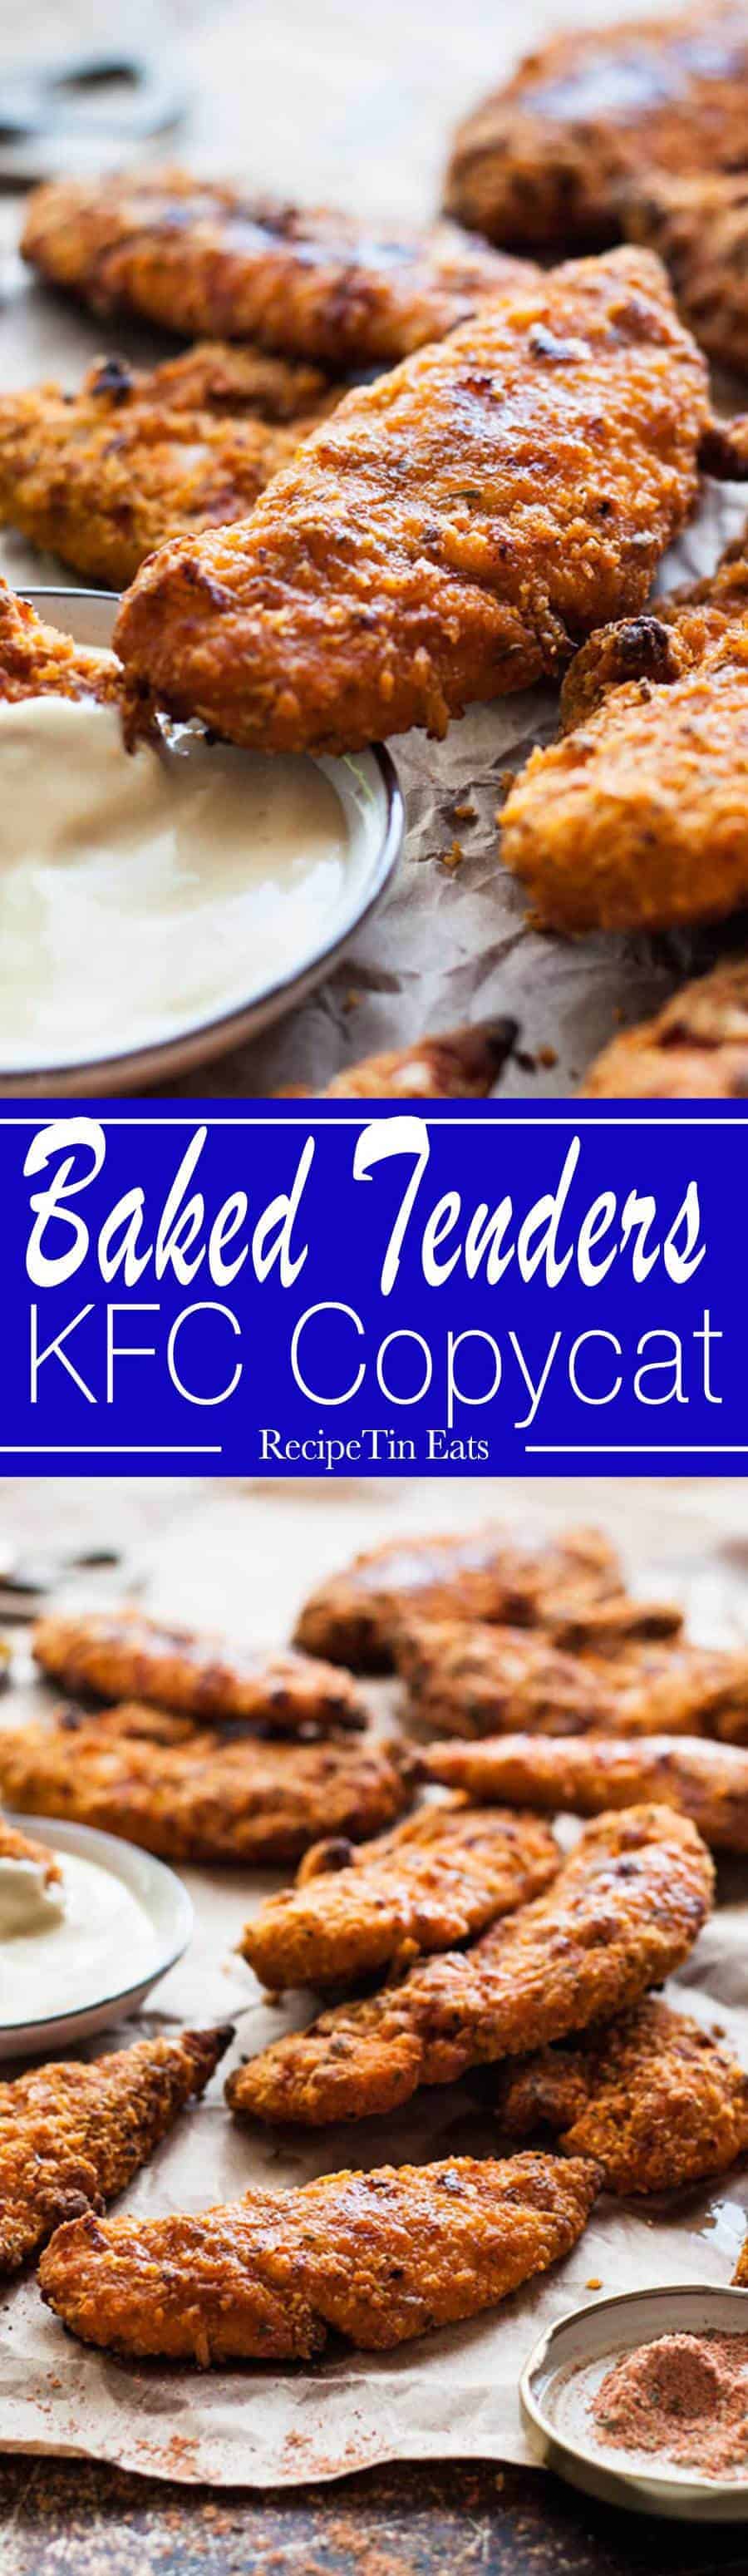 KFC Copycat Oven "Fried" Chicken Tenders | Made this for dinner the other night, this really does taste like KFC!!!! 